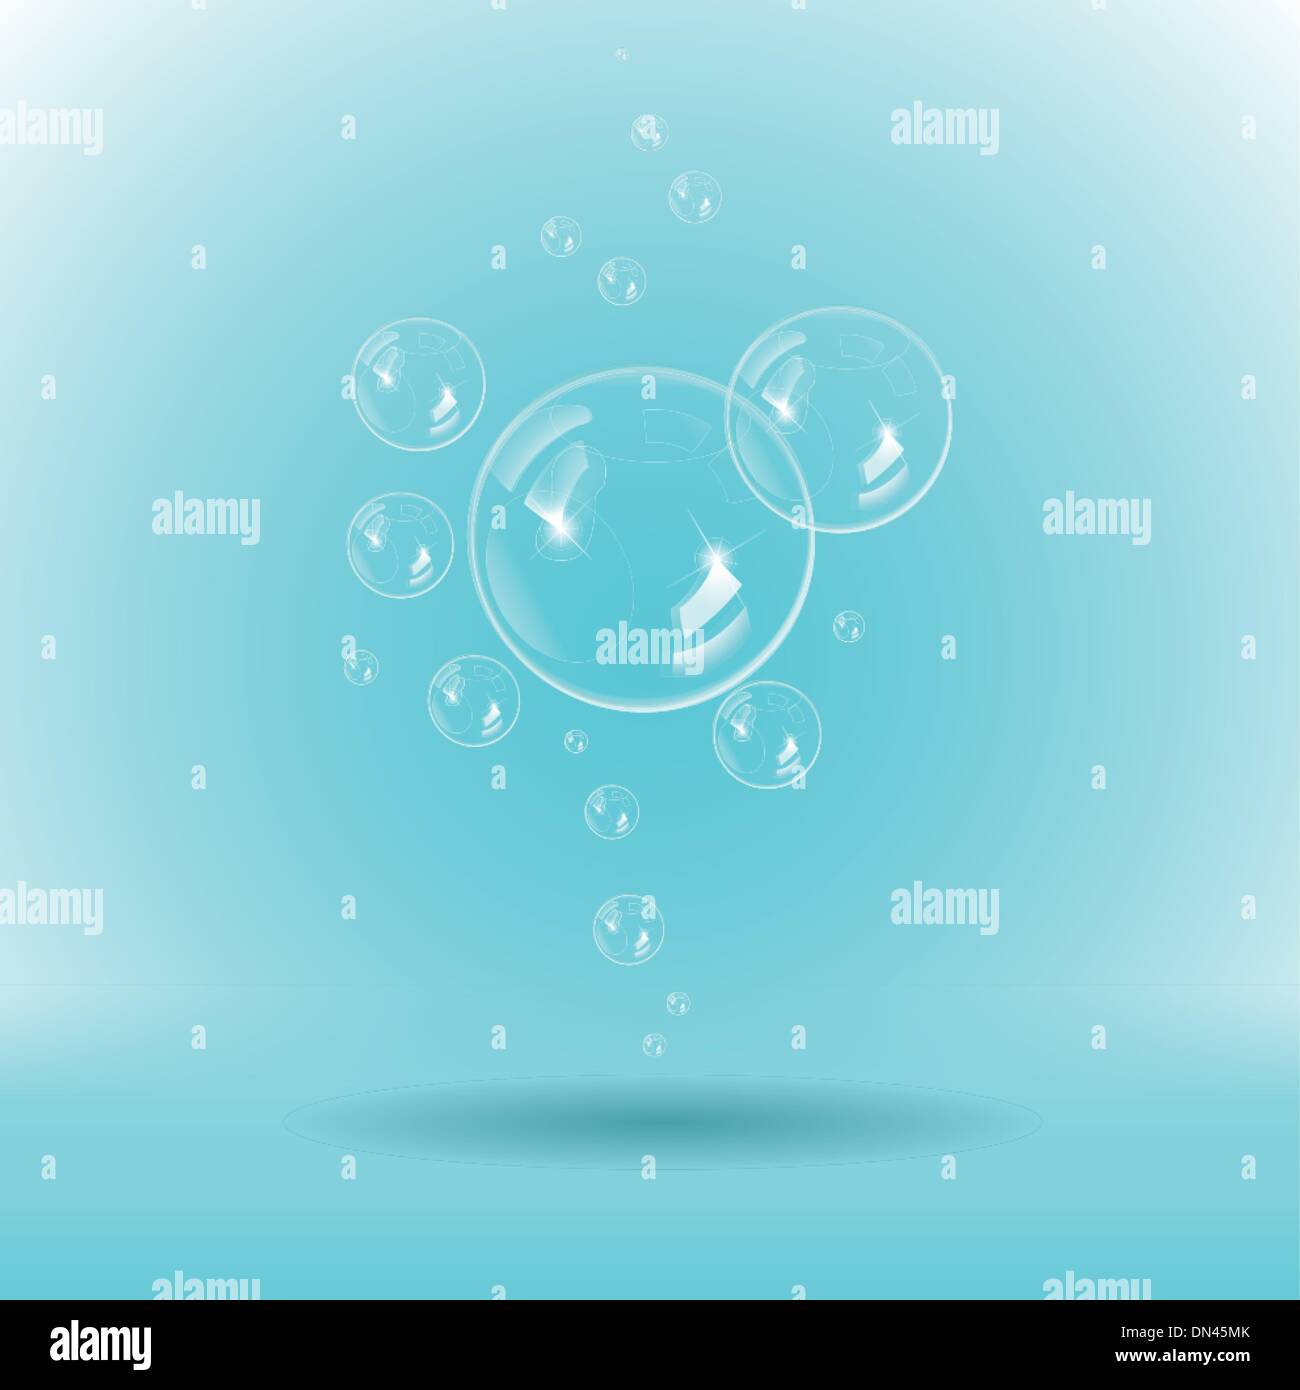 Soap soapy Stock Vector Images - Alamy